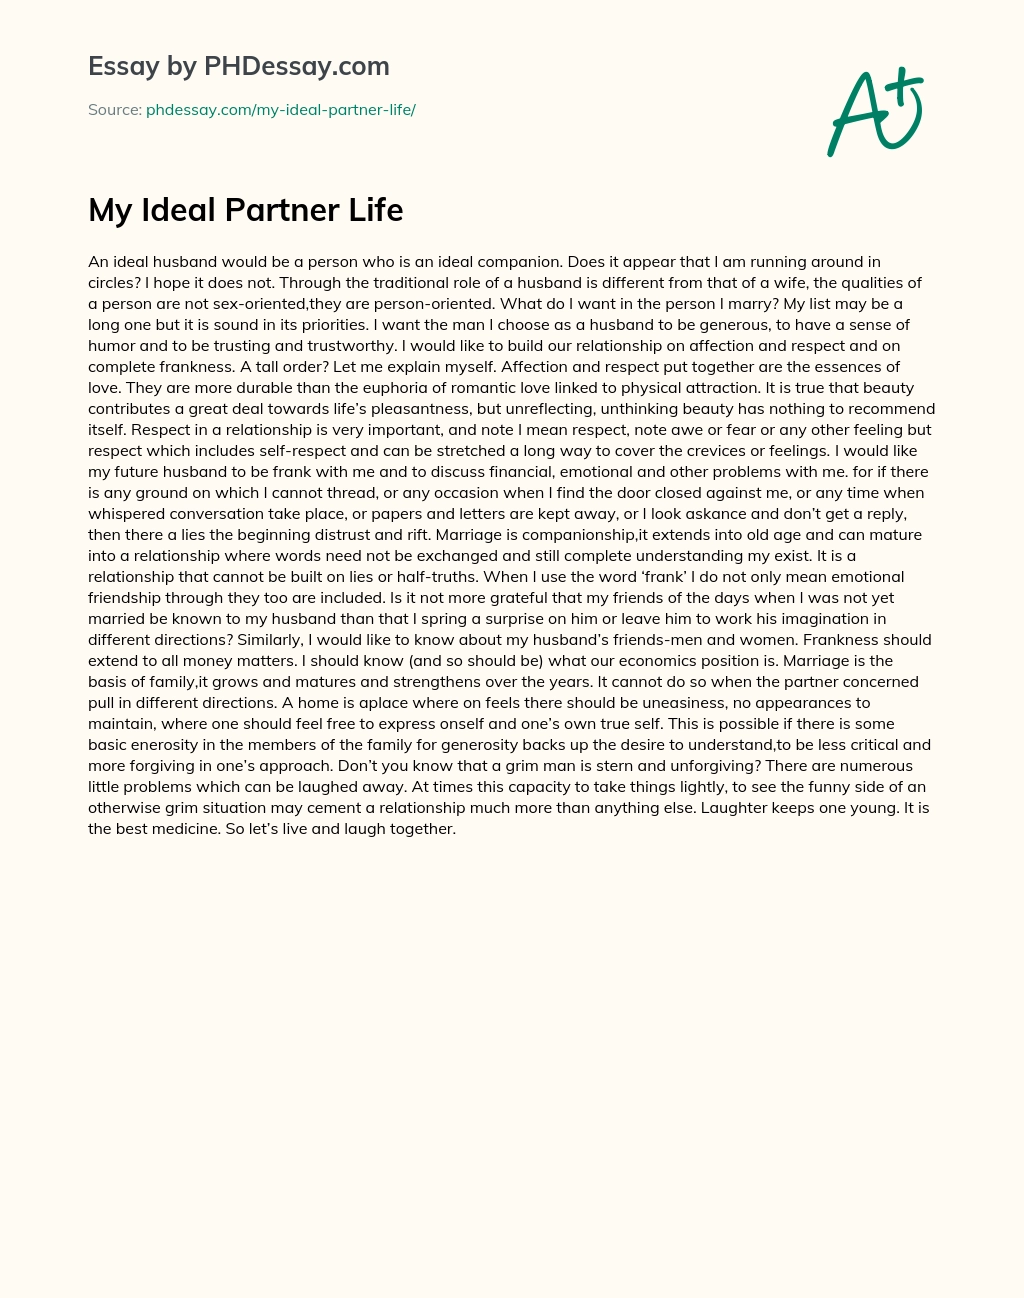 essay about life partner